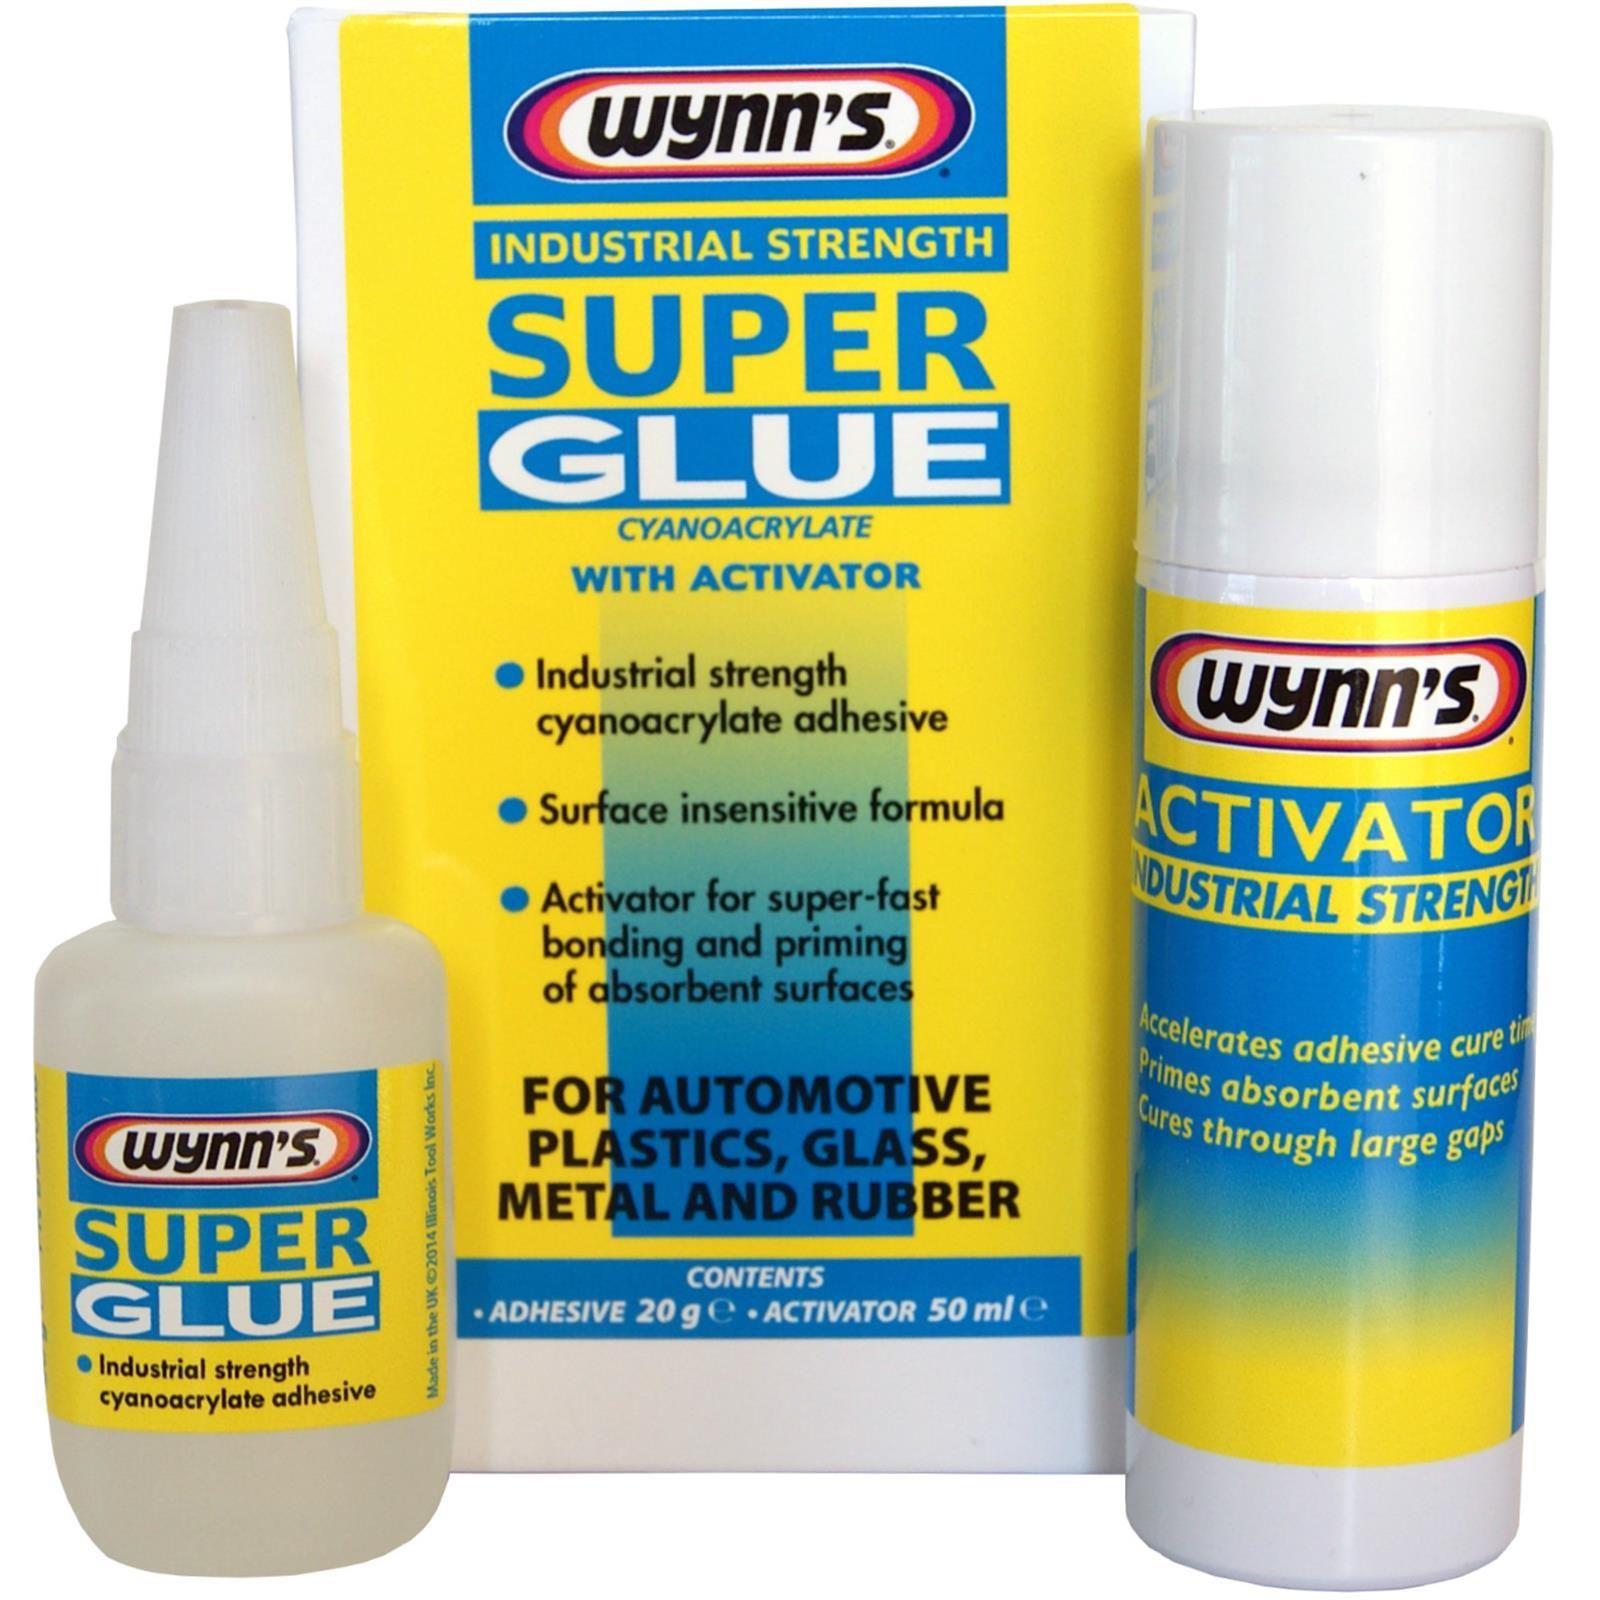 Wynn's Industrial Strength Super Glue with Activator